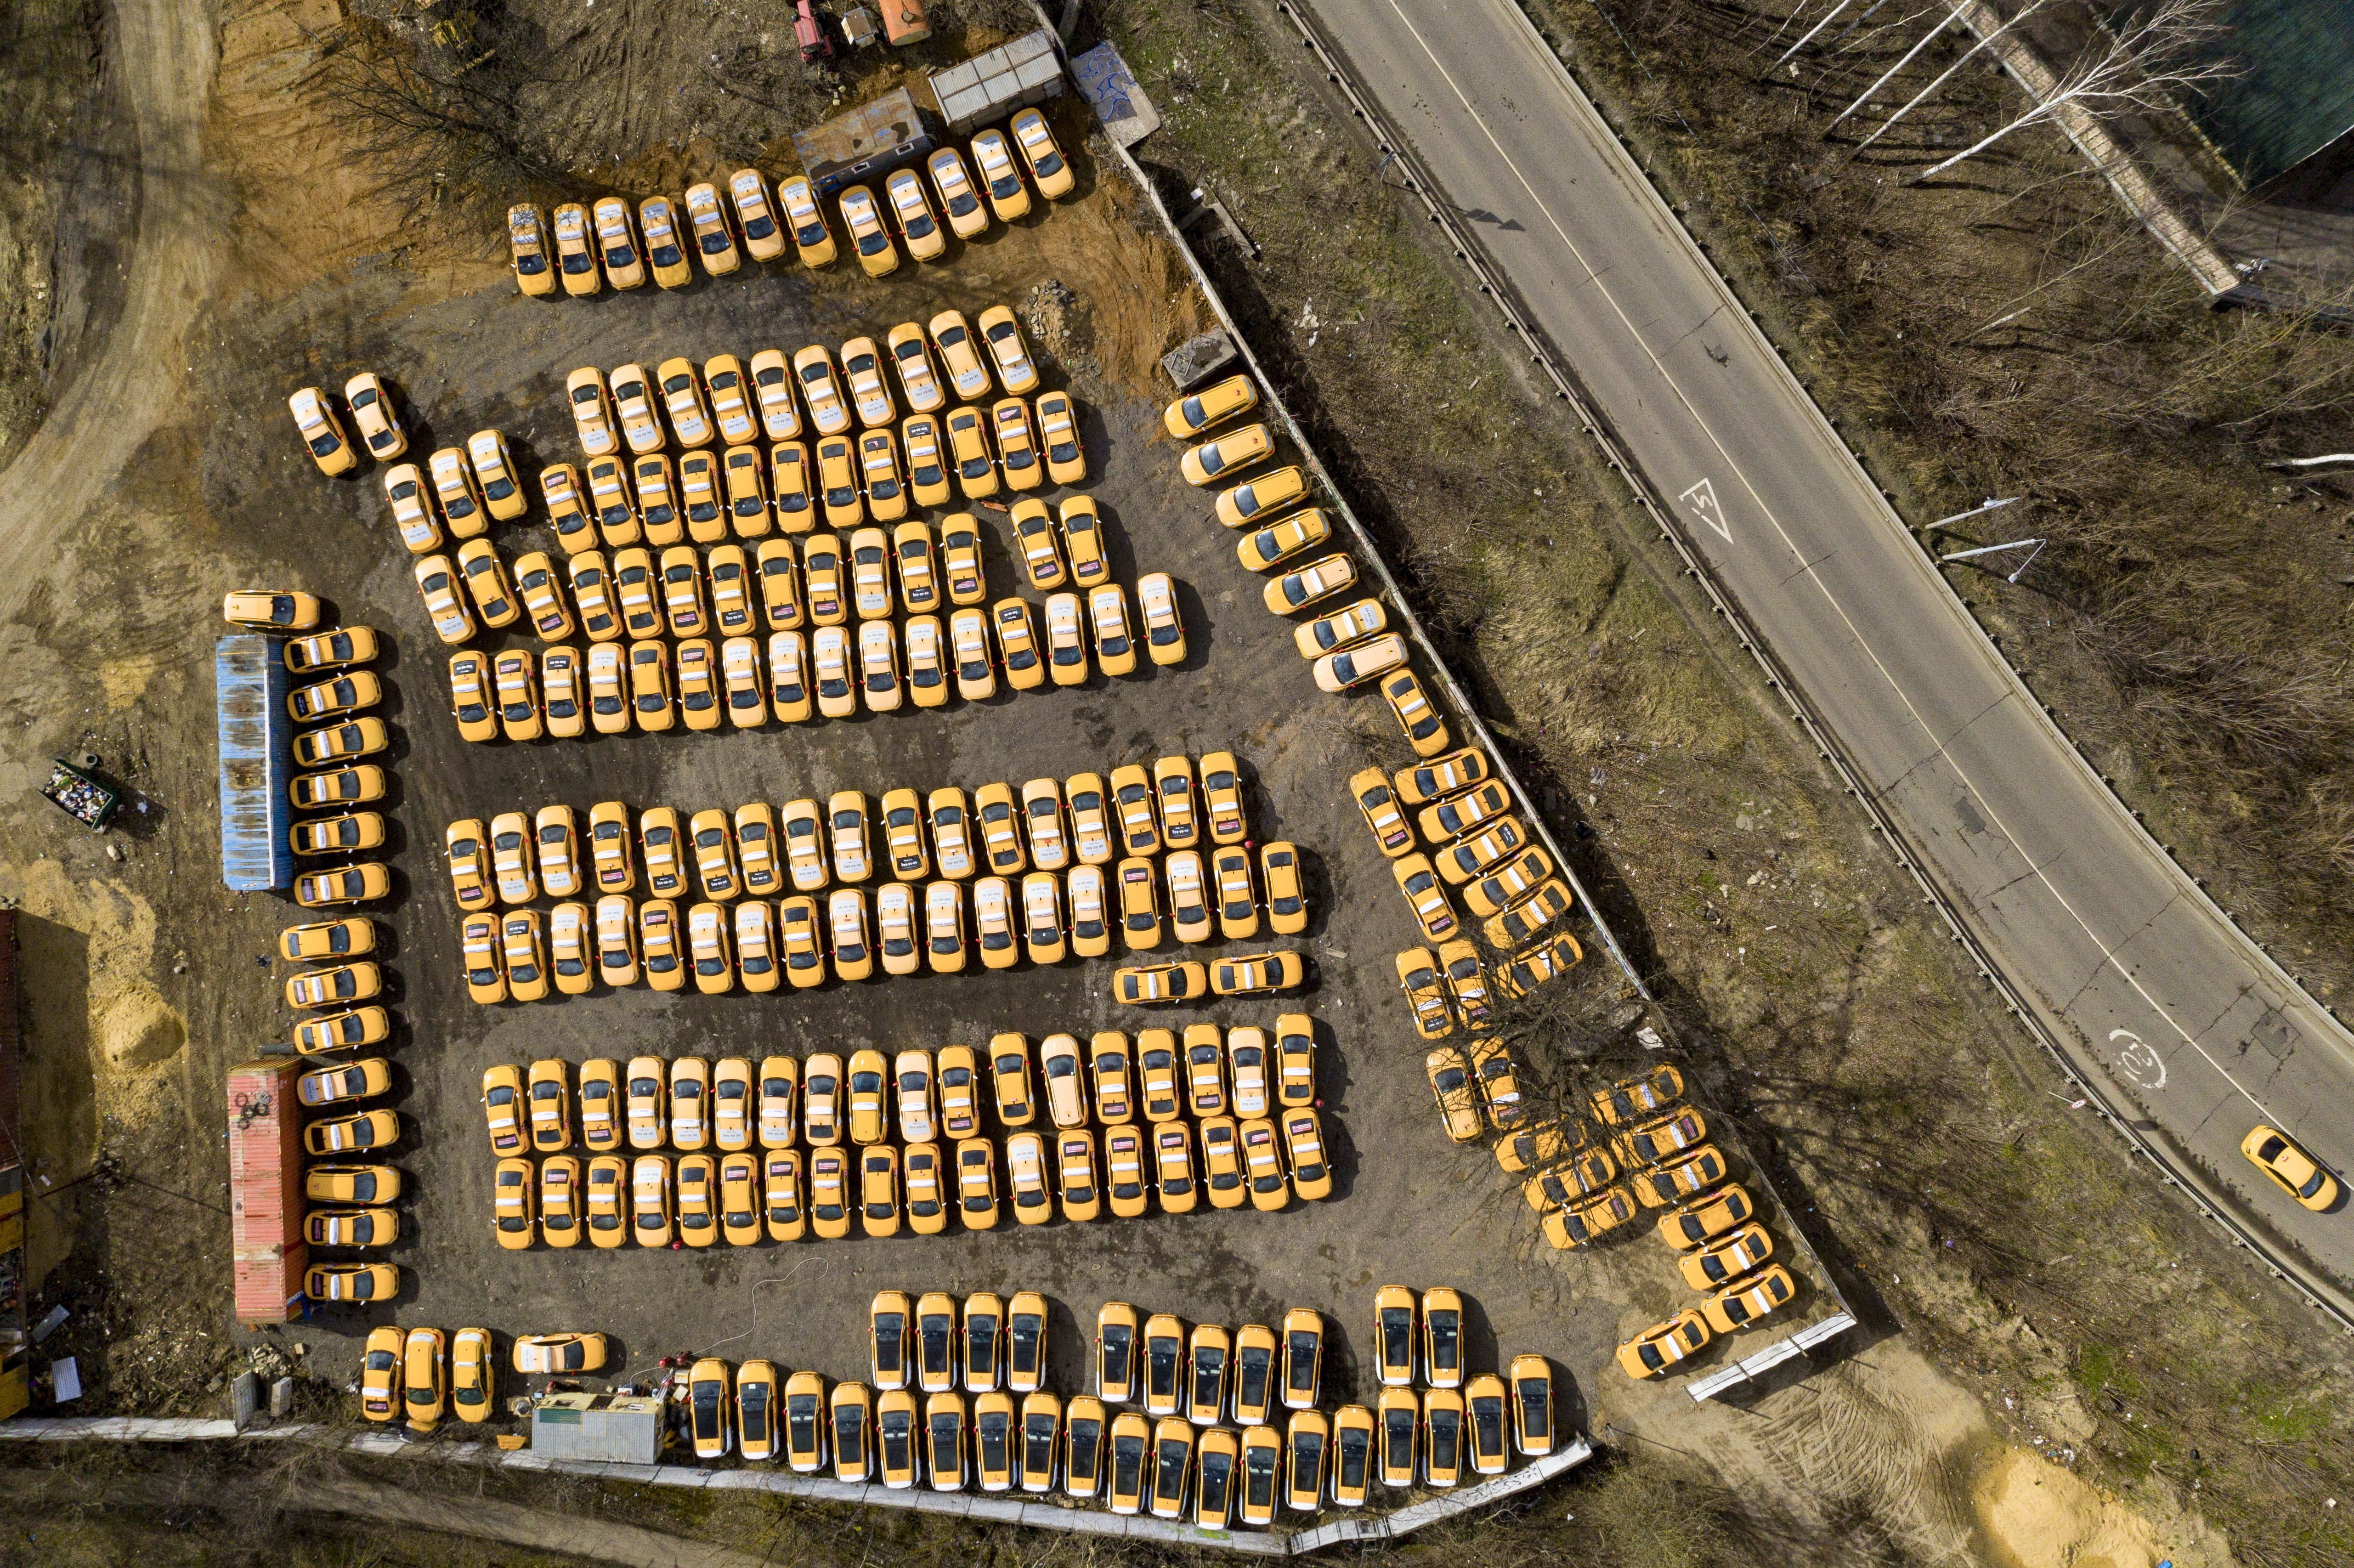 A taxi park full of parked cars due to lack of orders is viewed from a drone taken on the outskirts of Moscow, Russia, Sunday, April 5, 2020. President Vladimir Putin on Thursday ordered most Russians to stay off work until the end of the month as part of a partial economic shutdown to curb the spread of the coronavirus. The new coronavirus causes mild or moderate symptoms for most people, but for some, especially older adults and people with existing health problems, it can cause more severe illness or death. (AP Photo/Maxim Marmur)